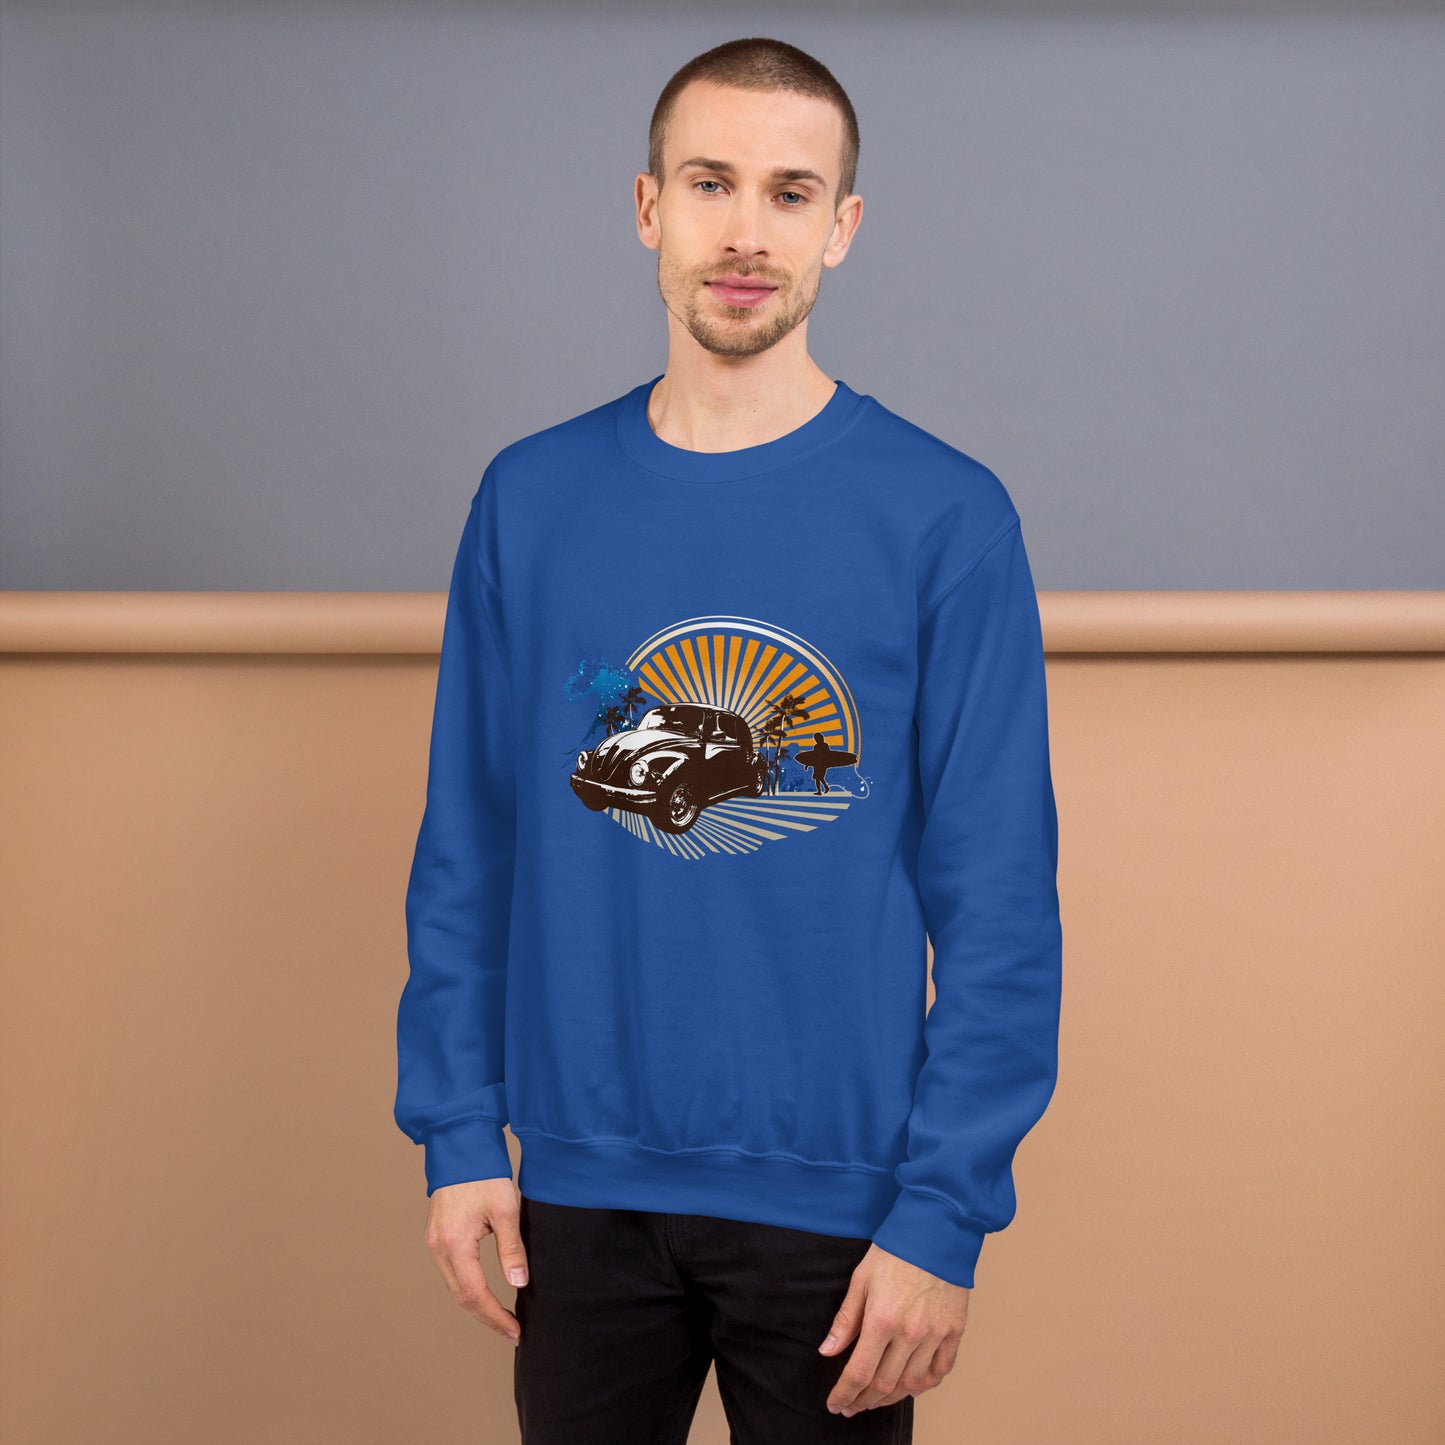 Men with royal blue sweatshirt with sunset and beetle car